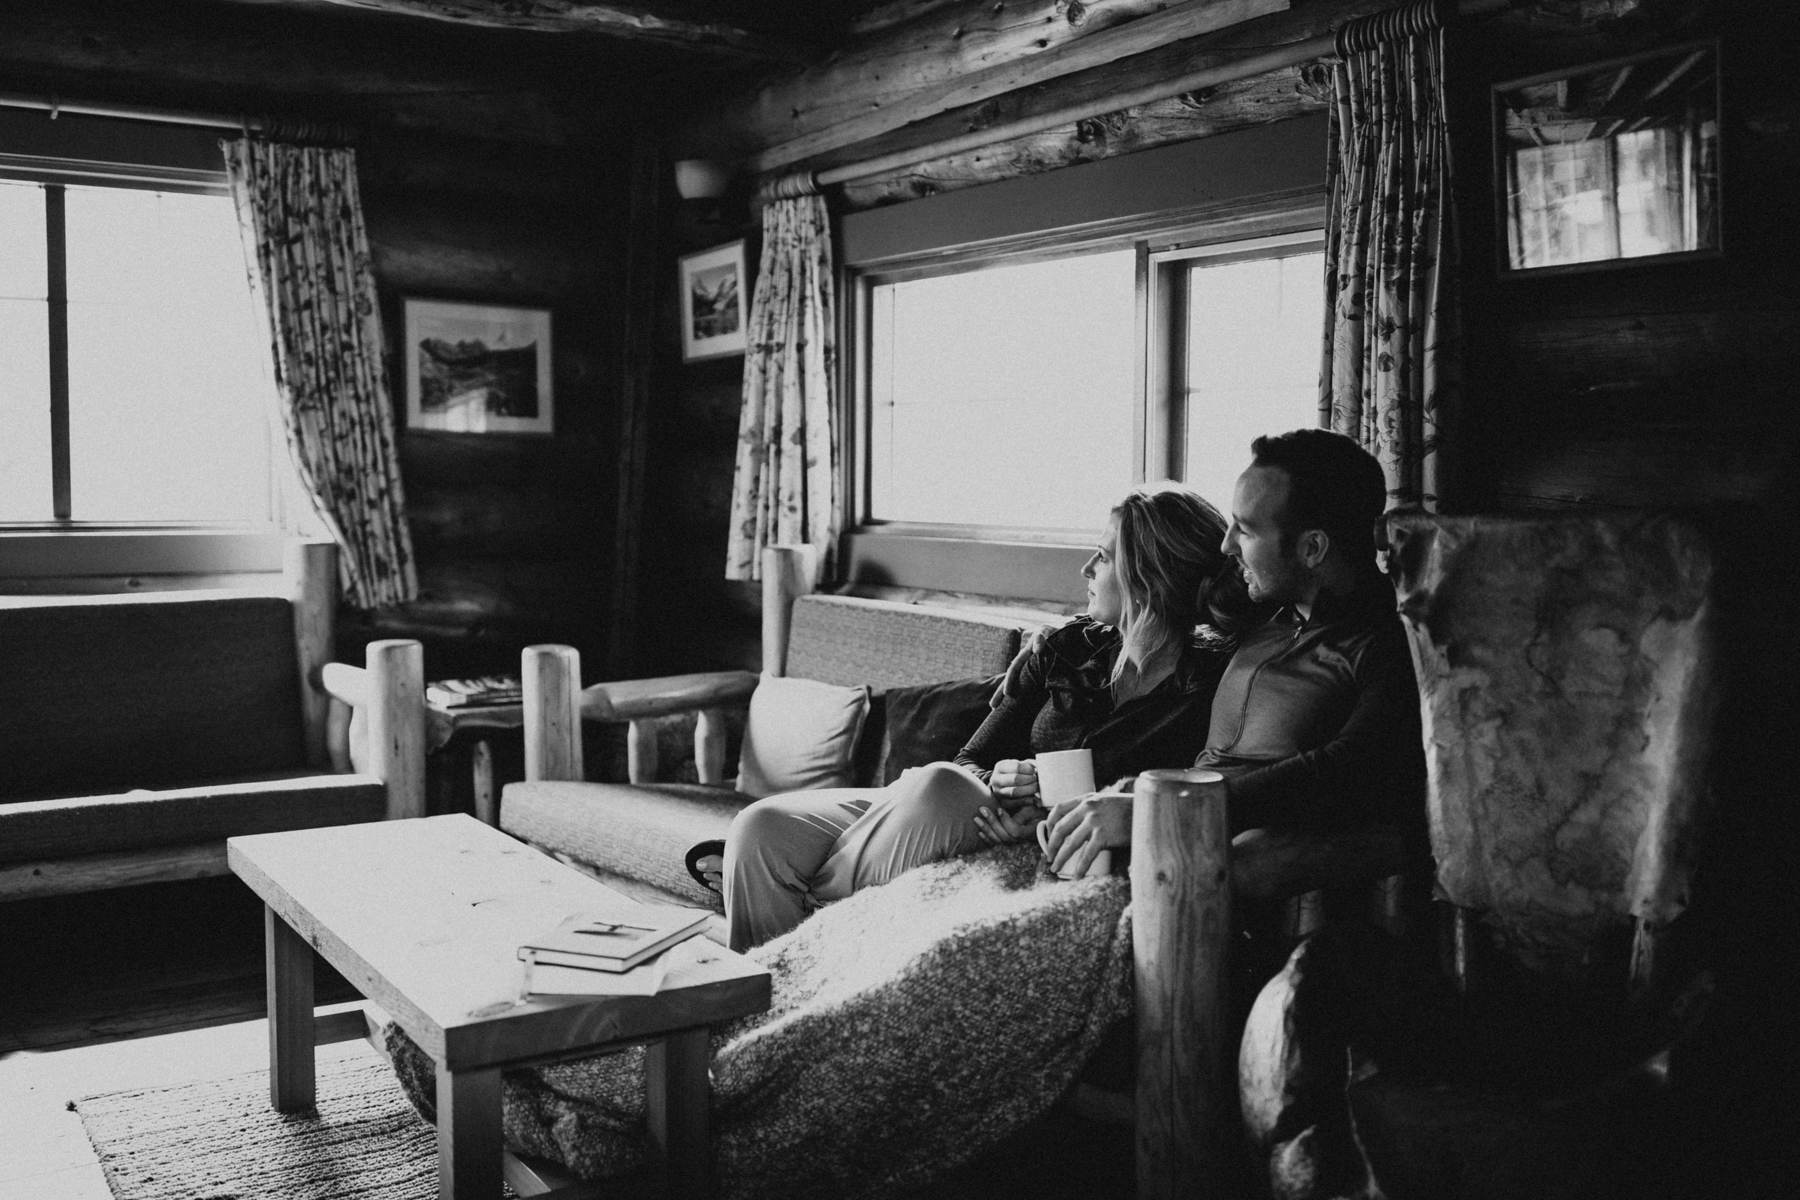 Mount Assiniboine Elopement Photographers at a Backcountry Lodge - Photo 9